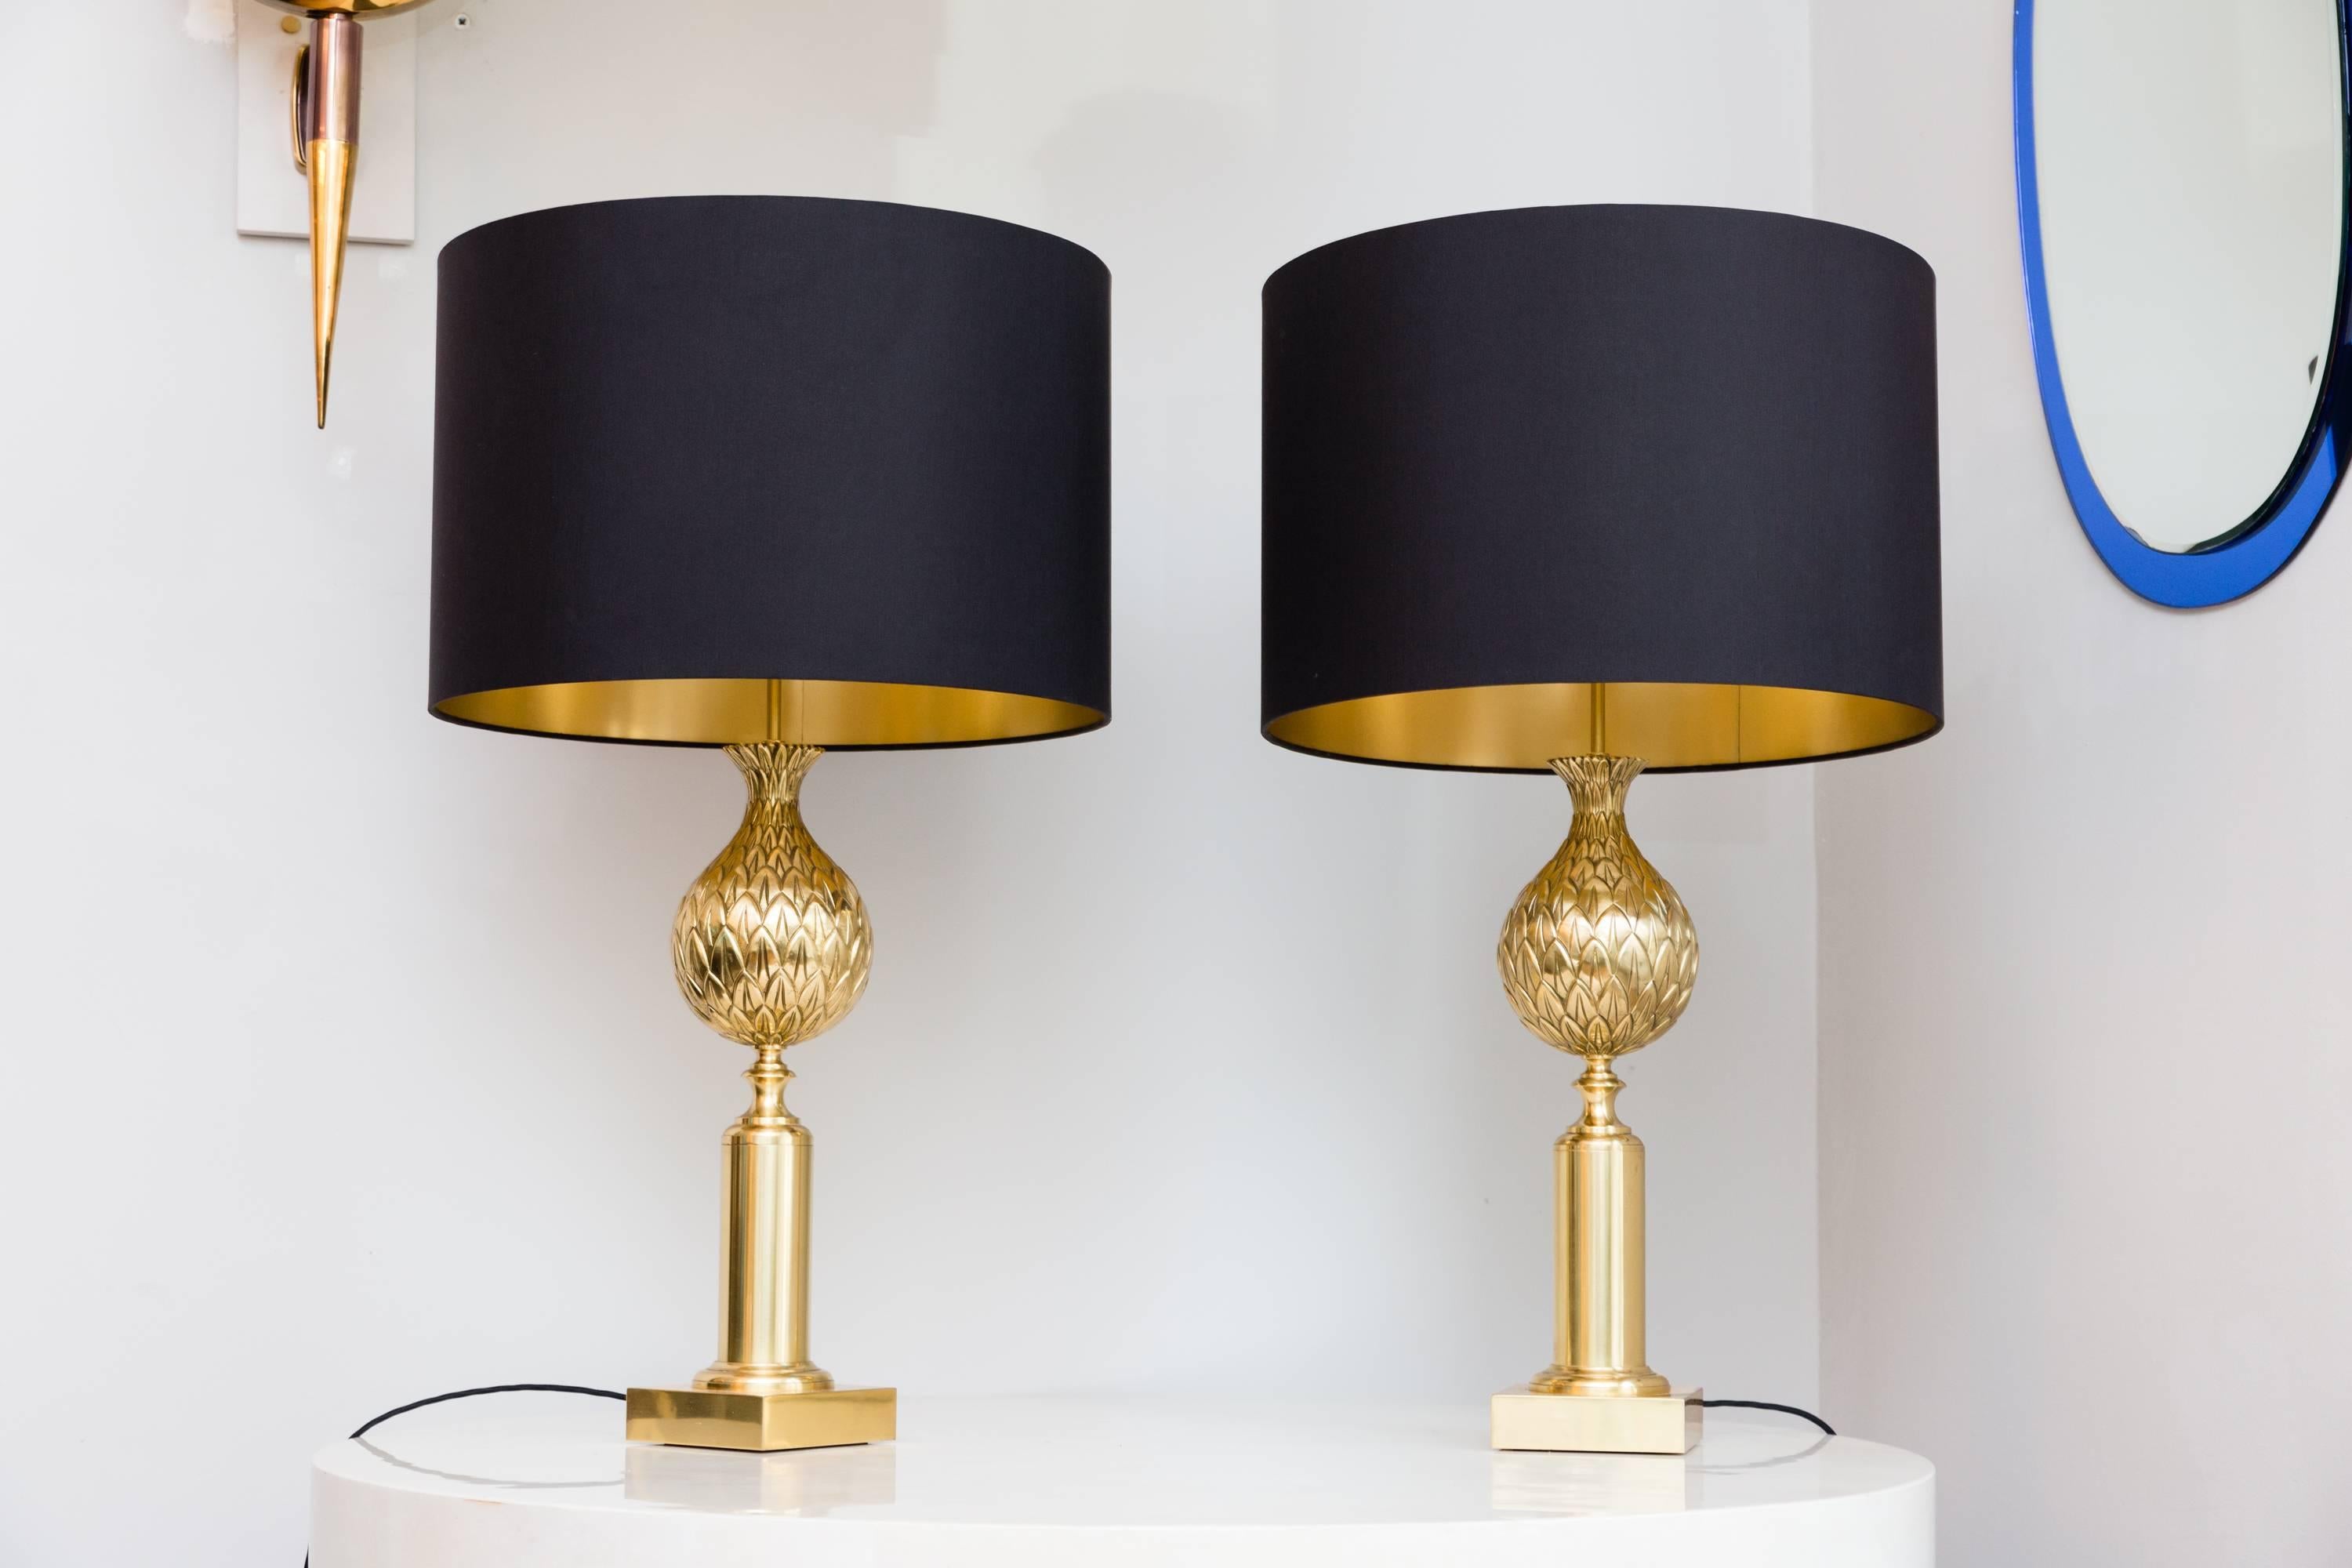 Elegant pair of Pineapple table lamps by Maison Charles, Paris, France, circa 1970, heavy solid brass base, Pineapples made in solid brass, brass stand, rewired with black cotton cable, black silk handmade shades with inside gold foil.
Very good